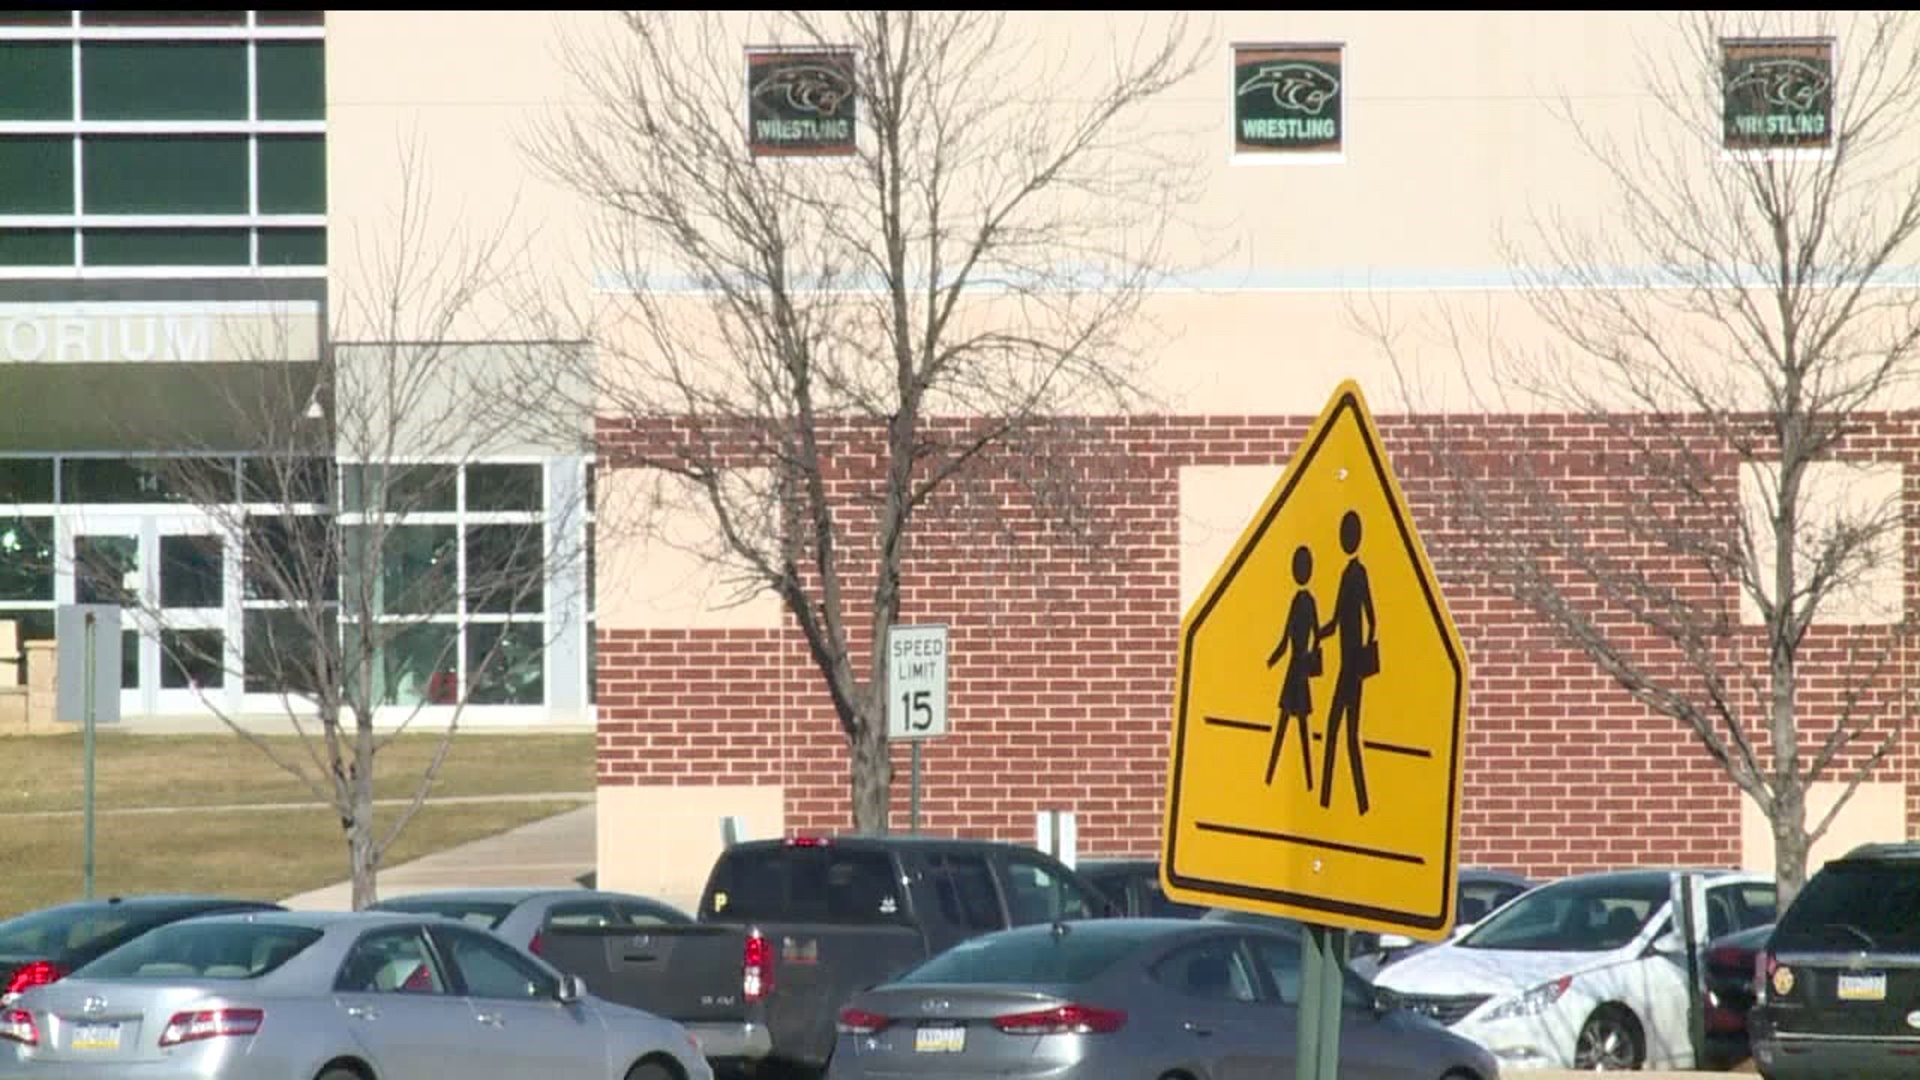 All schools in the Central York School District will be closed today due to several social media threats